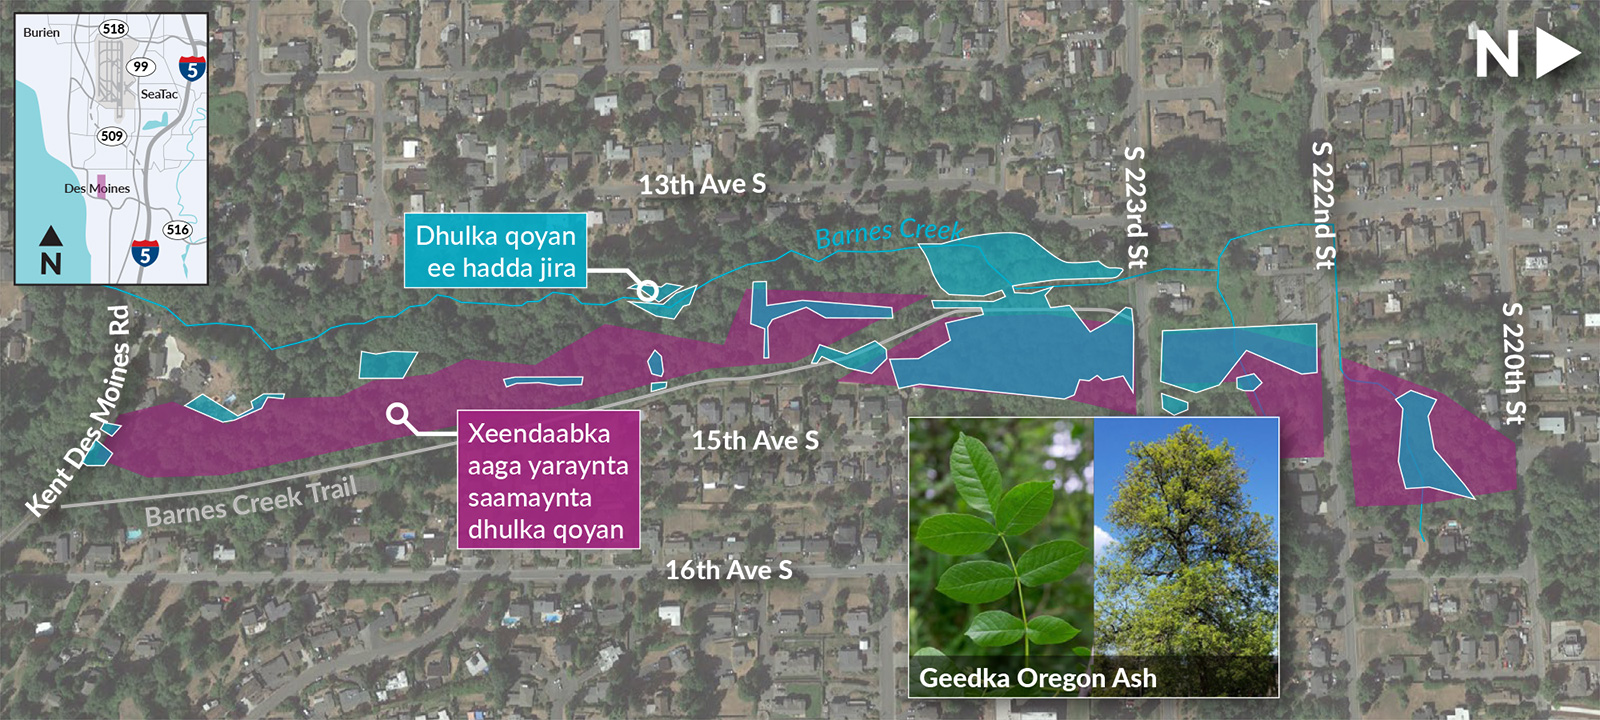 A map of the Barnes Creek Wetland Mitigation Site showing existing wetland areas and wetland buffer mitigation areas, all labels in Somali.
